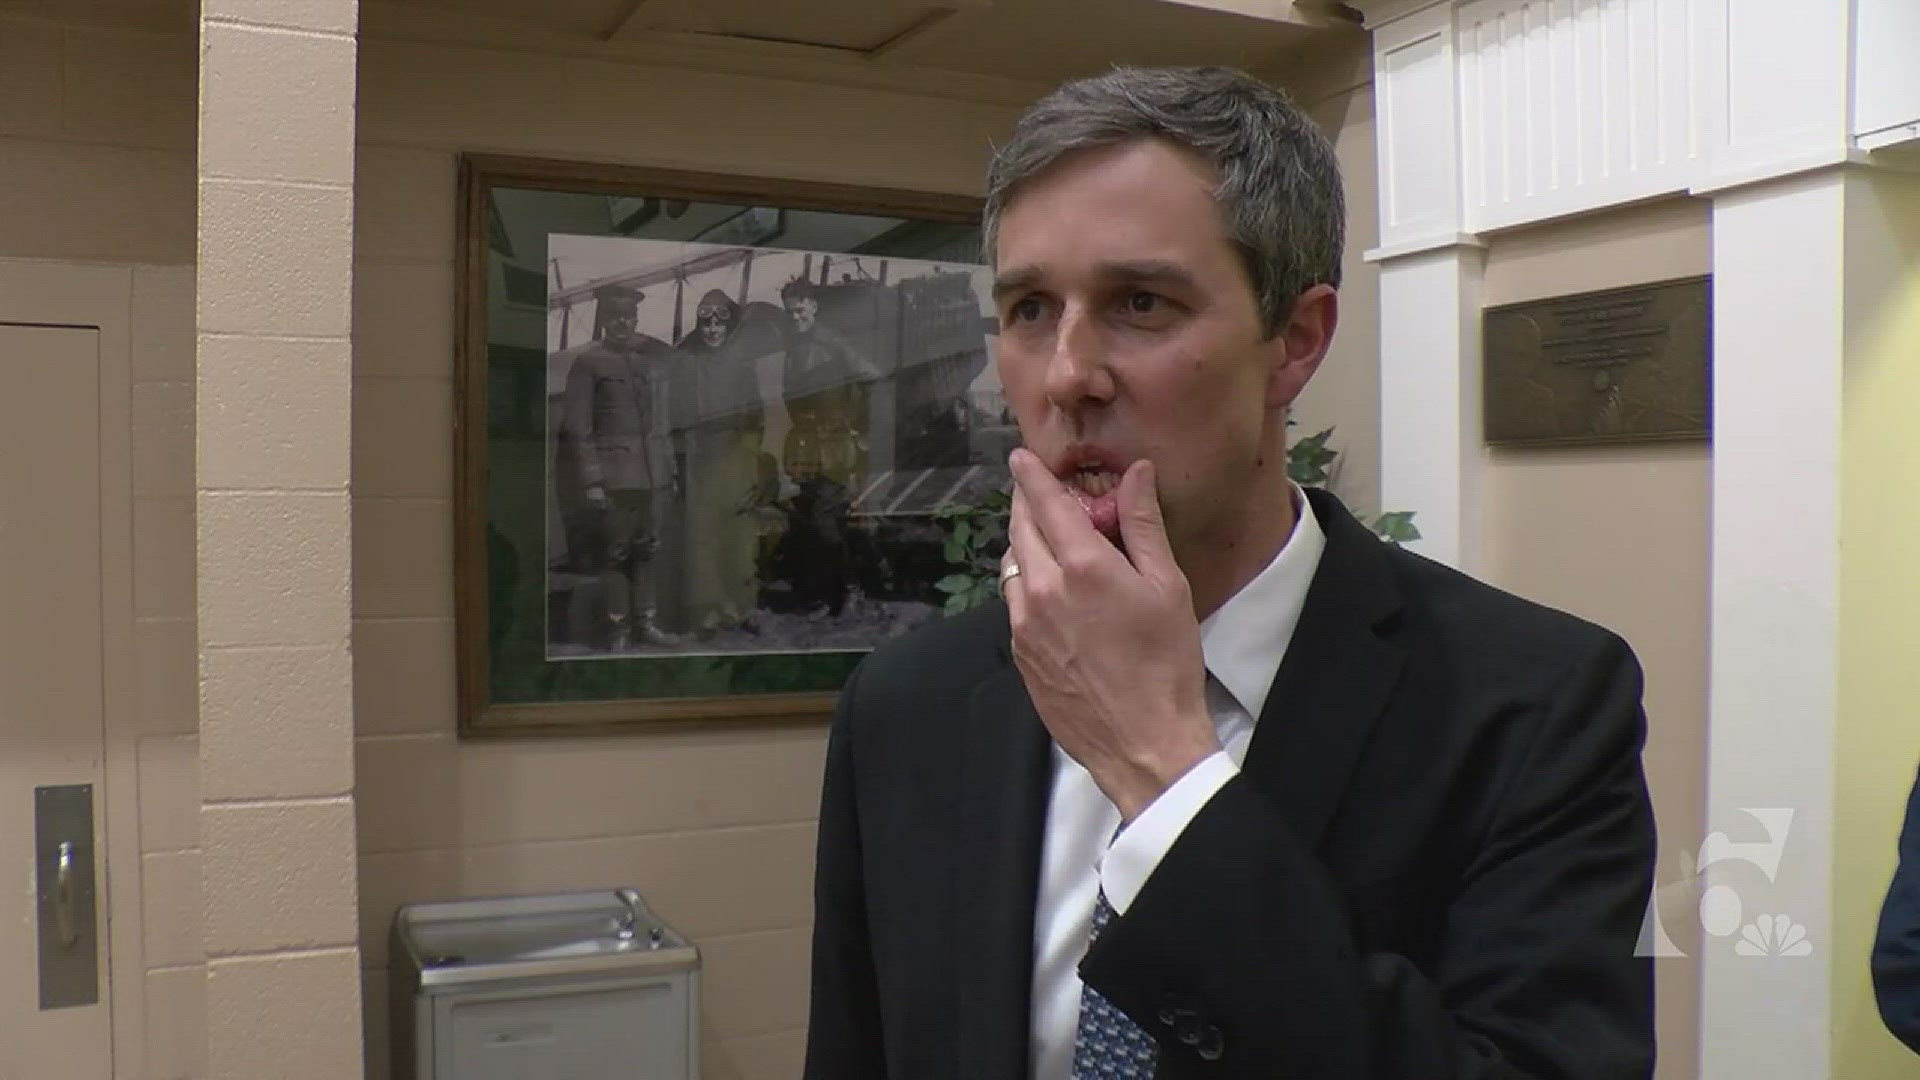 Beto O'Rourke talks to Channel 6's Kurtis Quillin about evidence there is a lot of energy this election season. O'Rourke is a democratic candidate for the U.S. Senate.